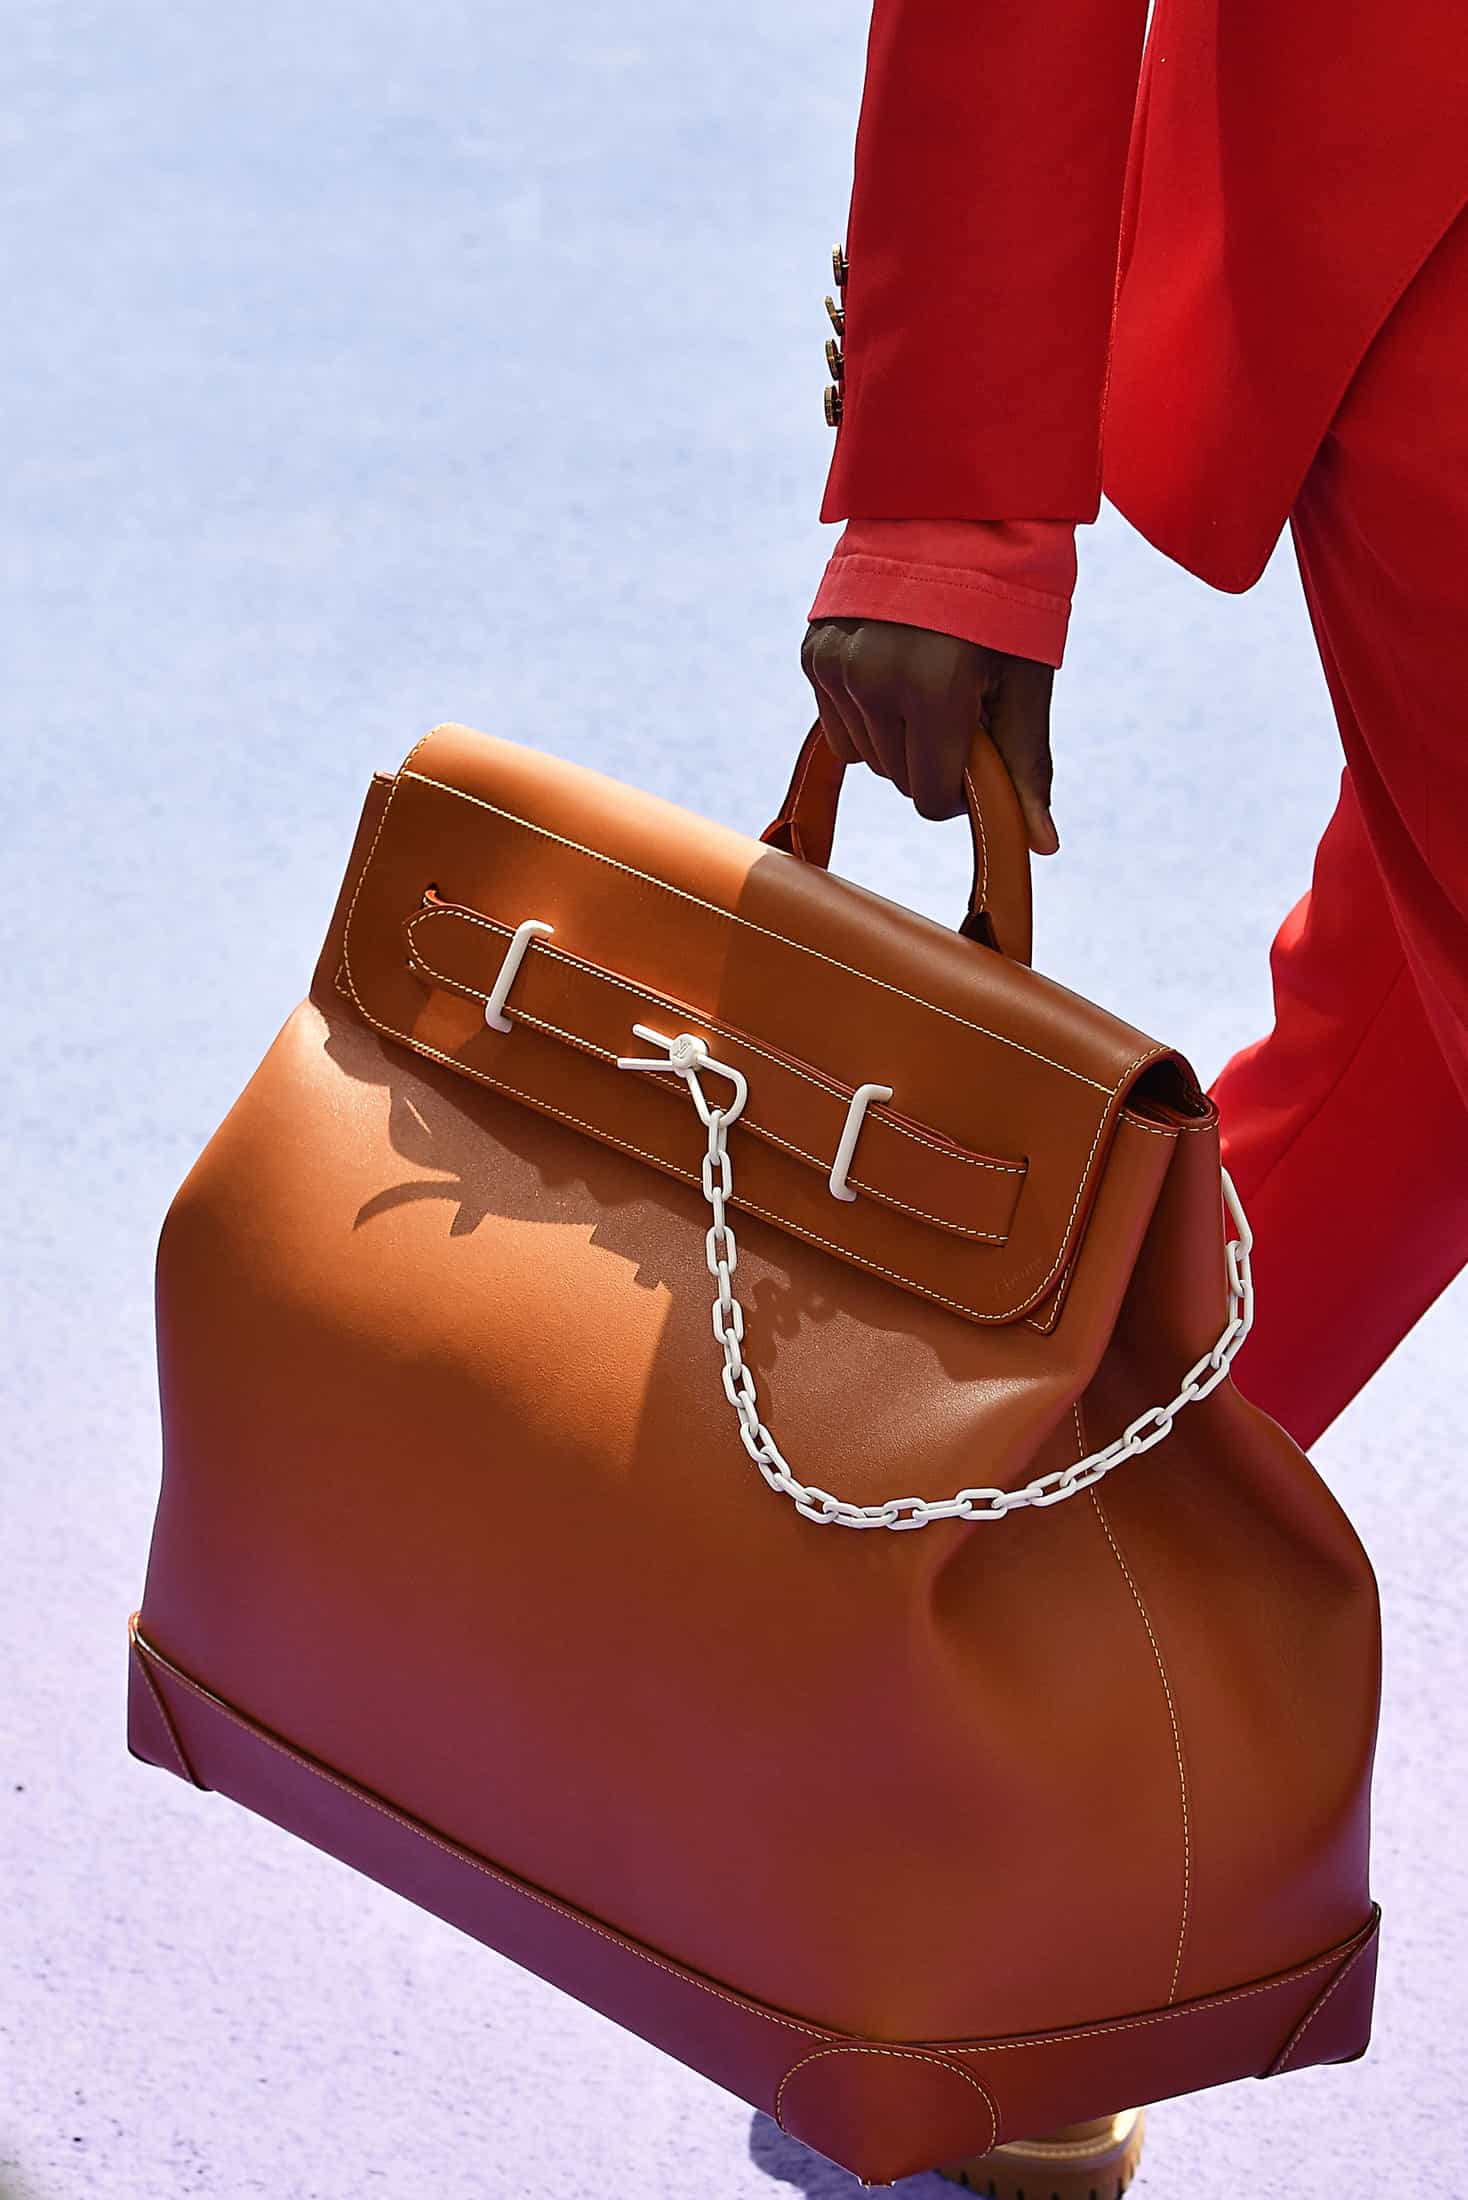 29 Best Shoes and Bags From Virgil Abloh Debut Collection for Louis Vuitton